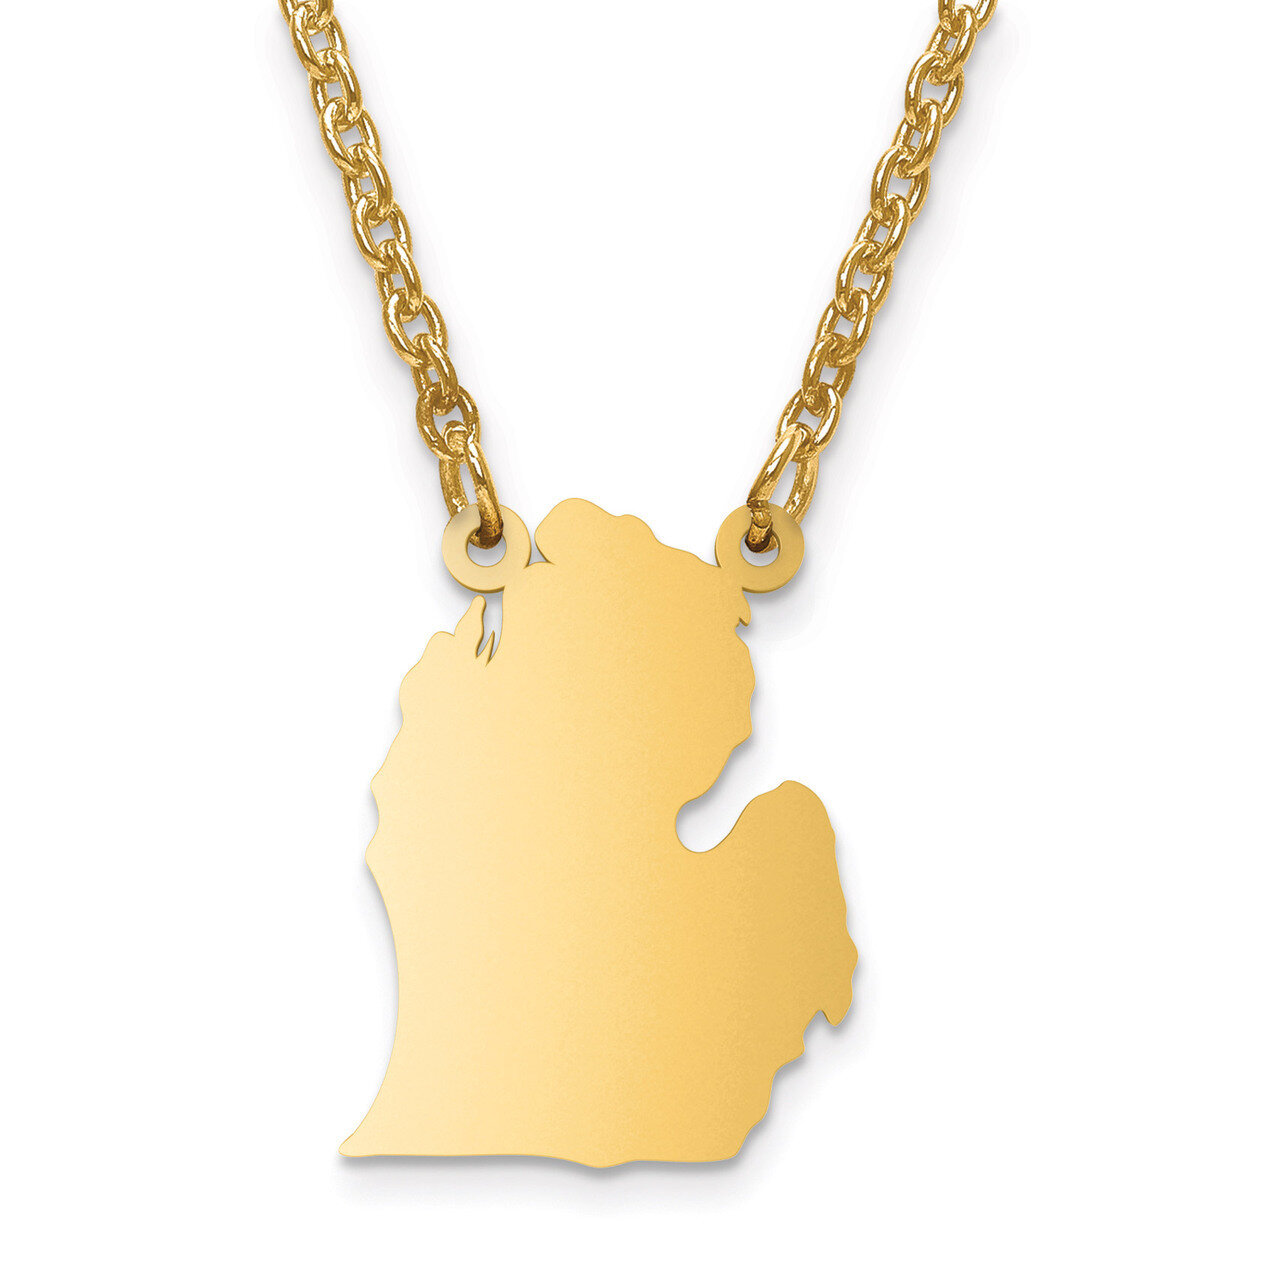 Michigan State Pendant with Chain Engravable Gold-plated on Sterling Silver